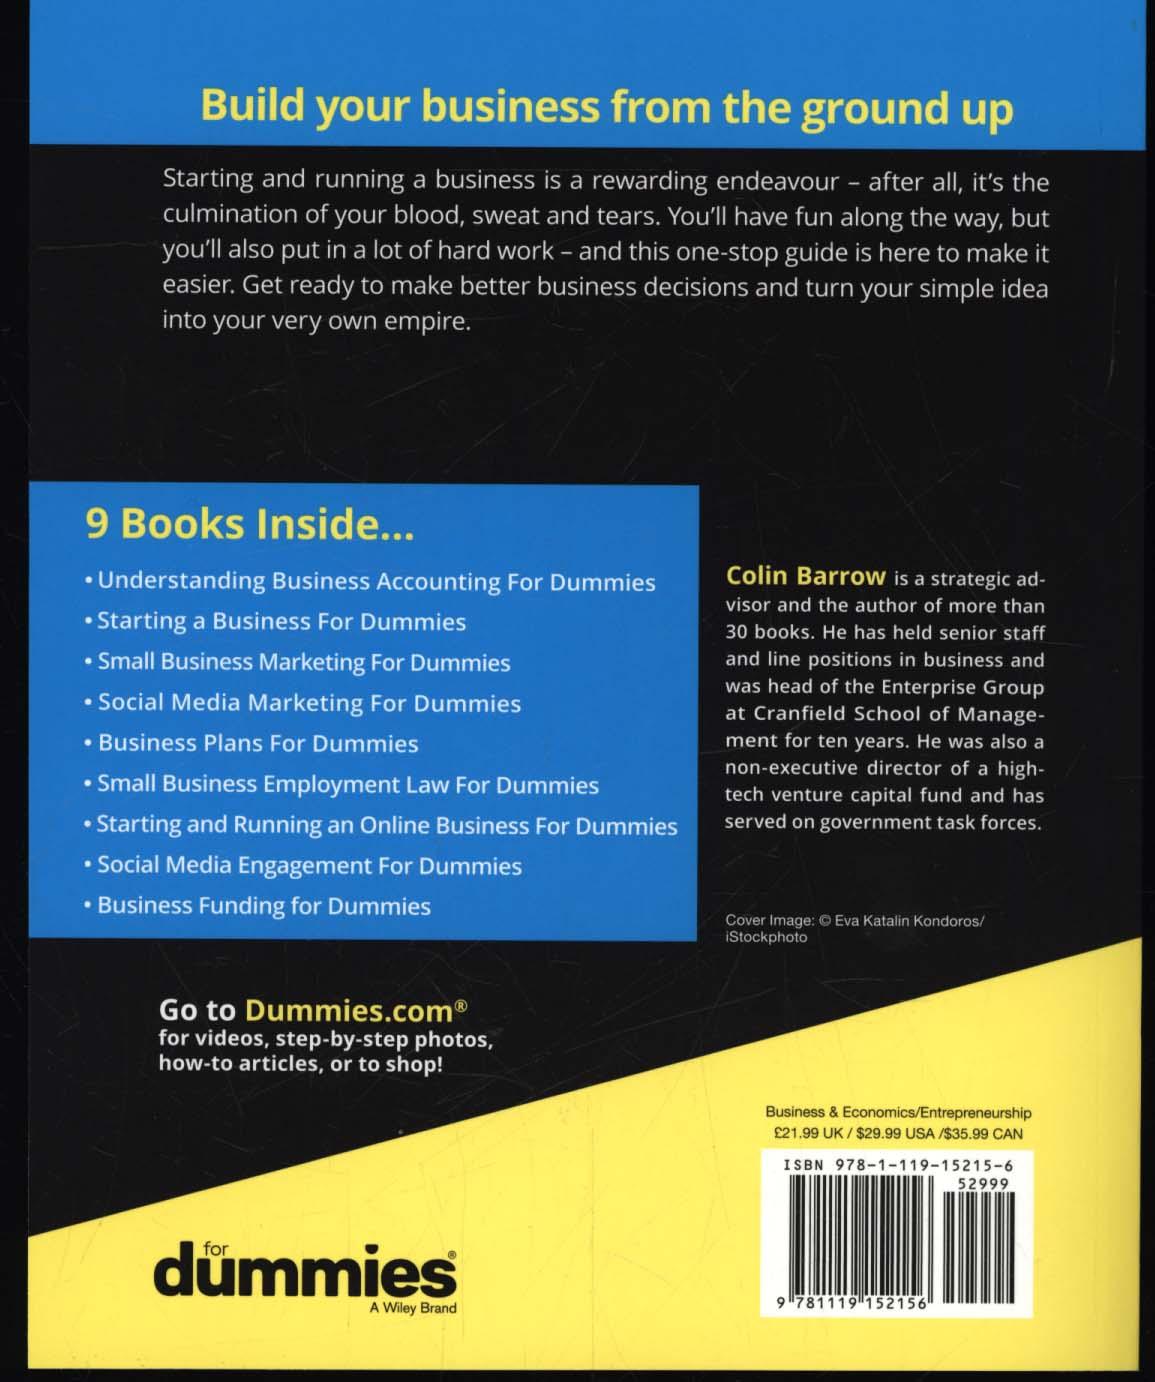 Starting & Running a Business All-in-One For Dummies